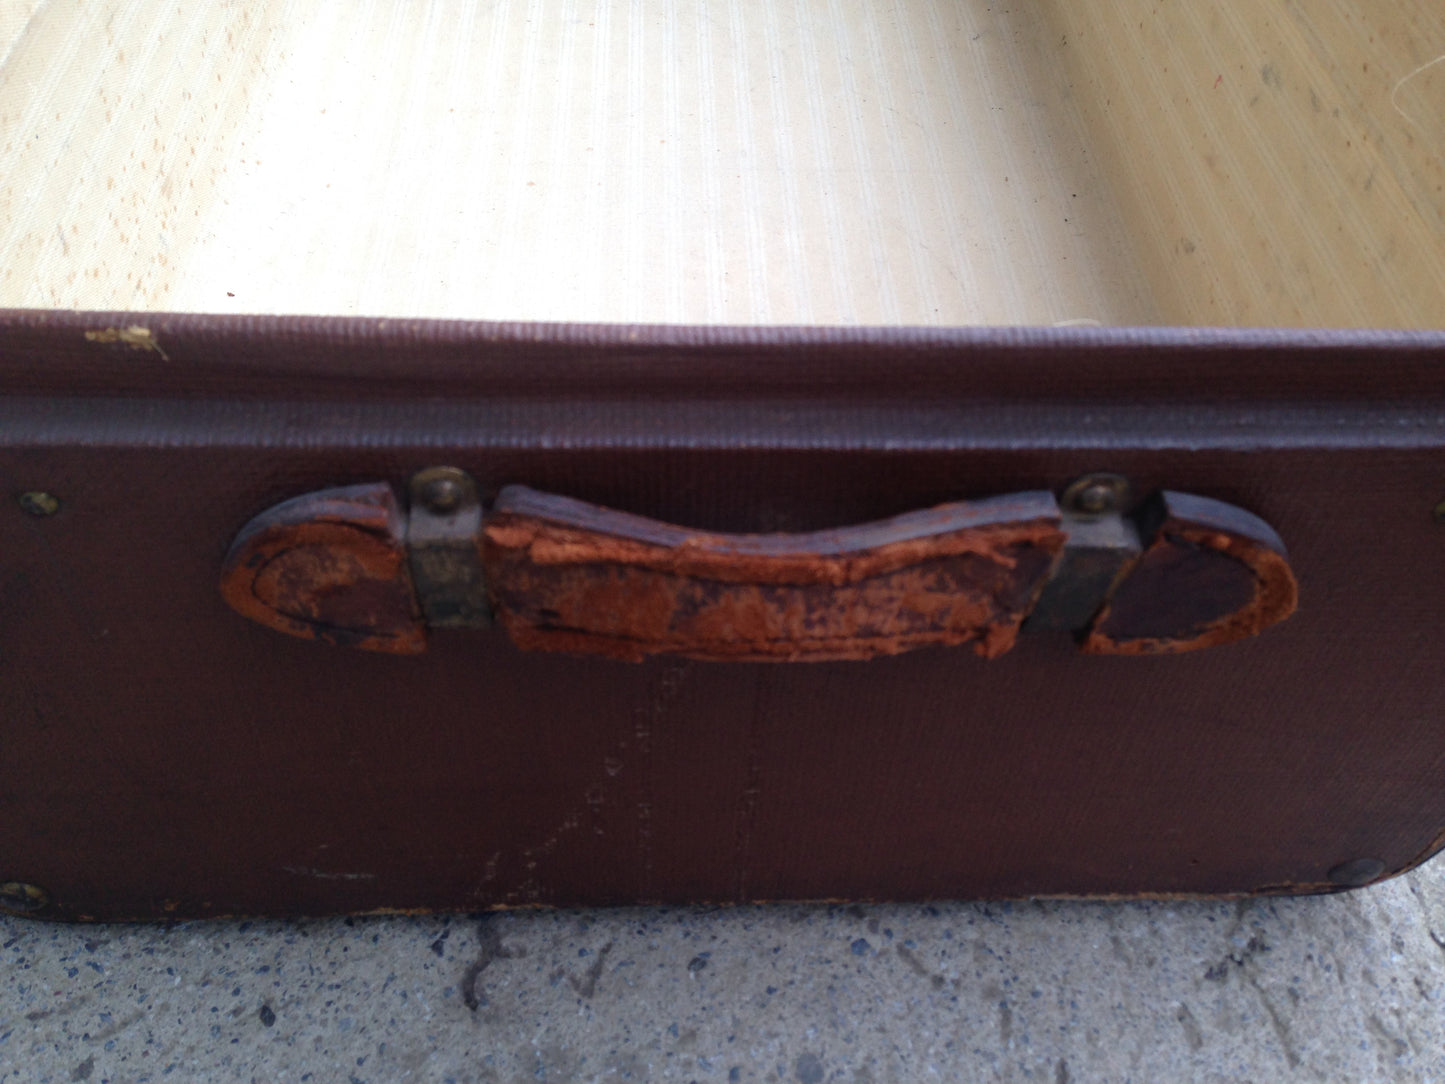 204.....Vintage Travel Trunk / Make Great Coffee Table....SOLD !